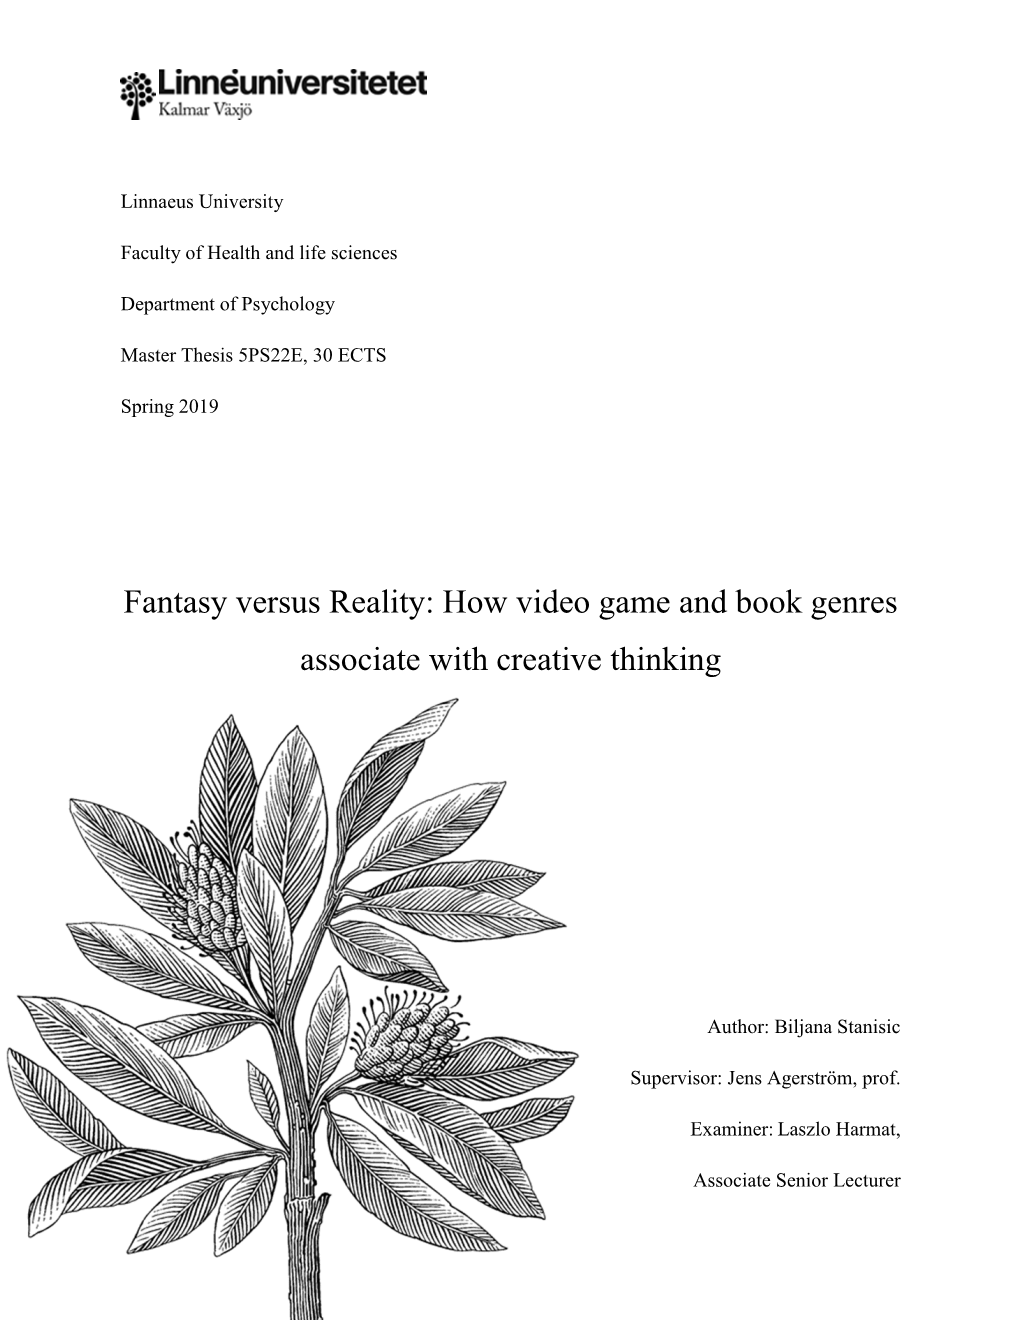 Fantasy Versus Reality: How Video Game and Book Genres Associate with Creative Thinking